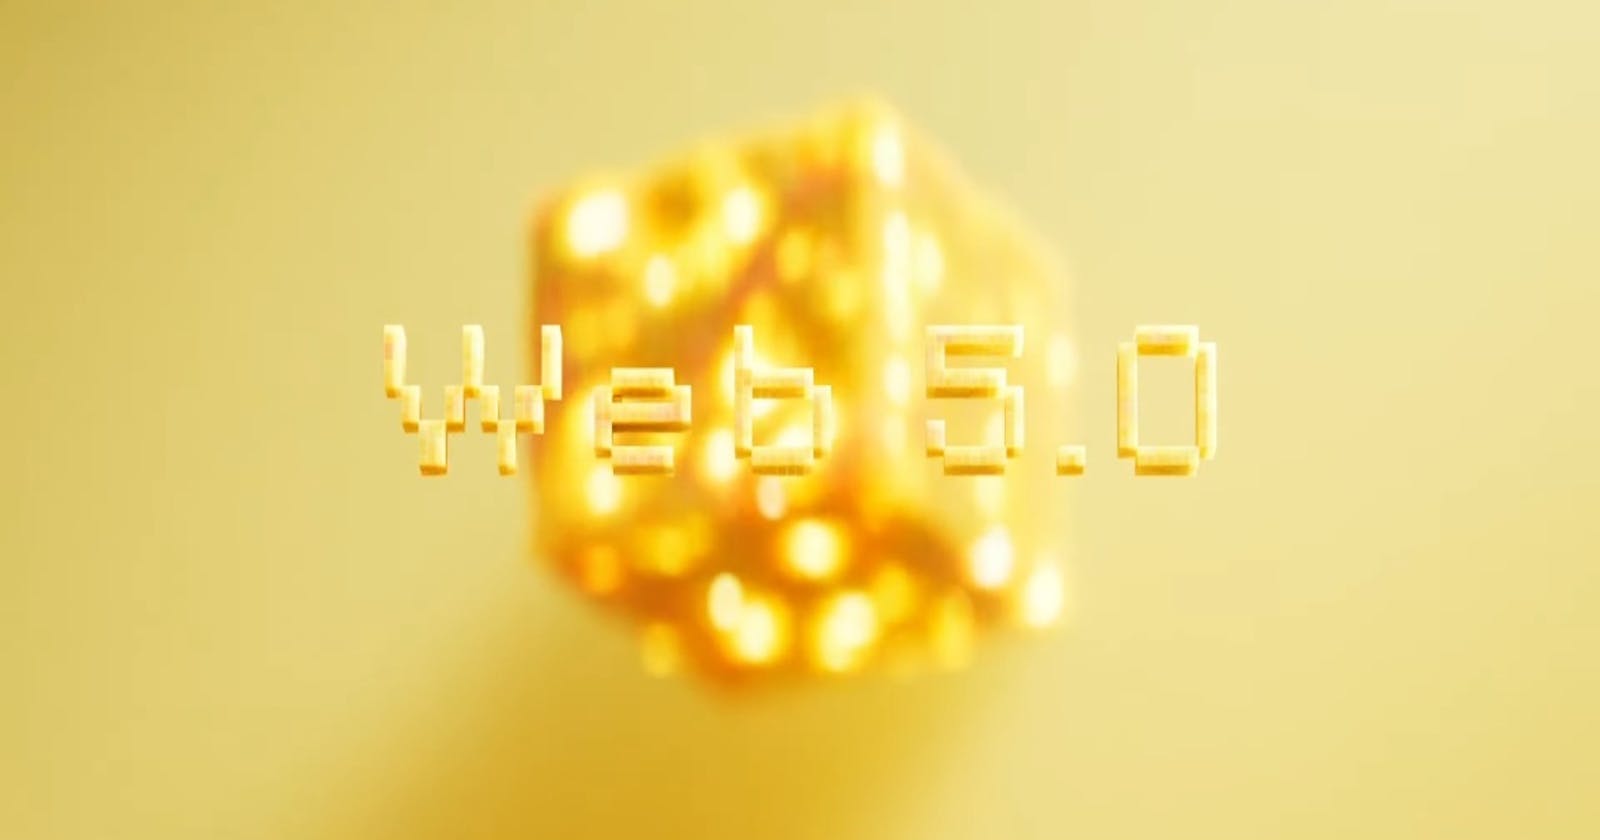 Ever heard of Web5?
Delve in, let's figure it out together.